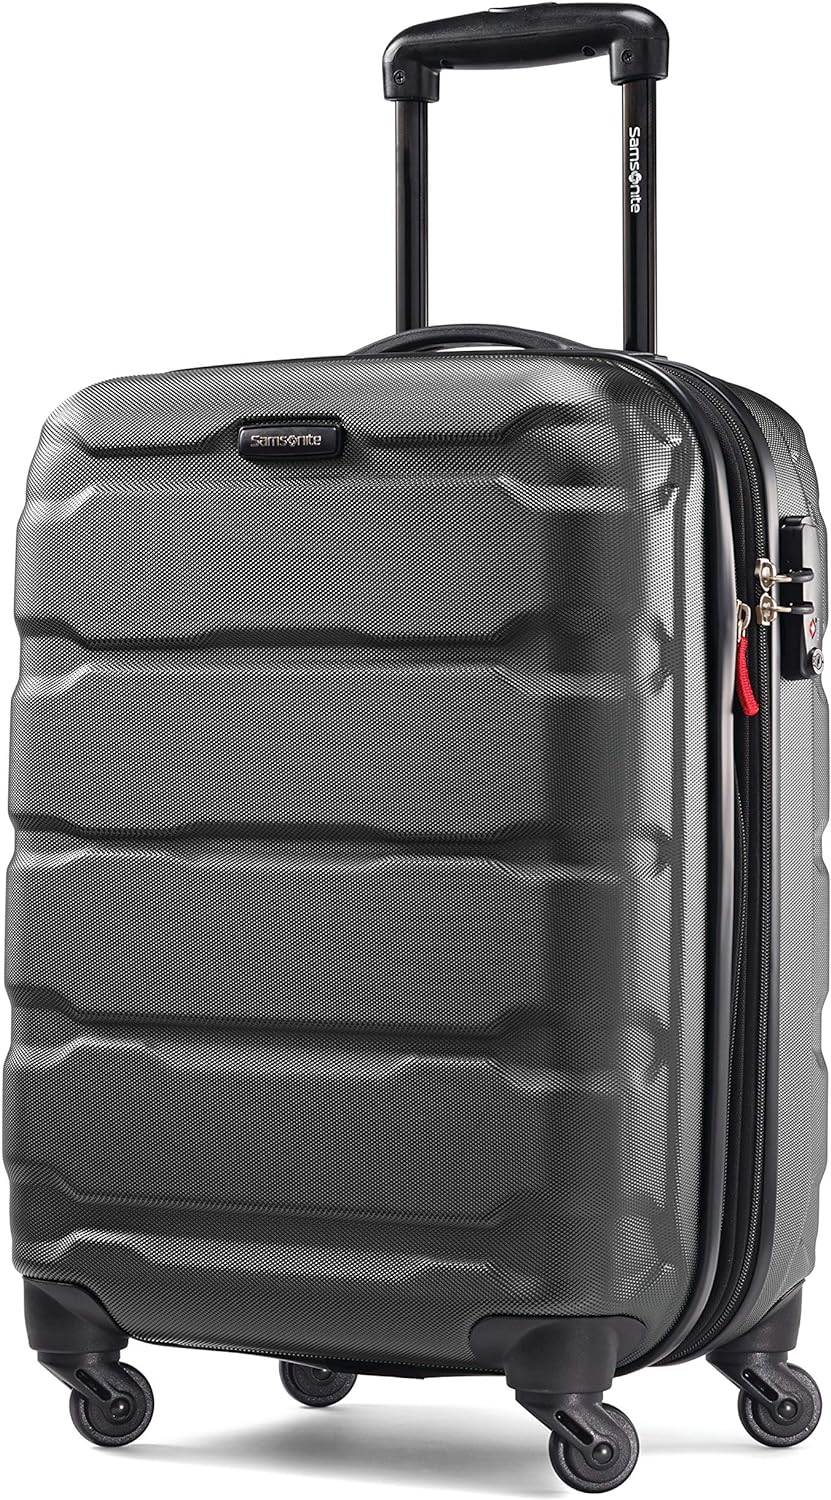 Samsonite Omni PC Hardside Expandable Luggage with Spinner Wheels, Carry-On 20-Inch, Black 